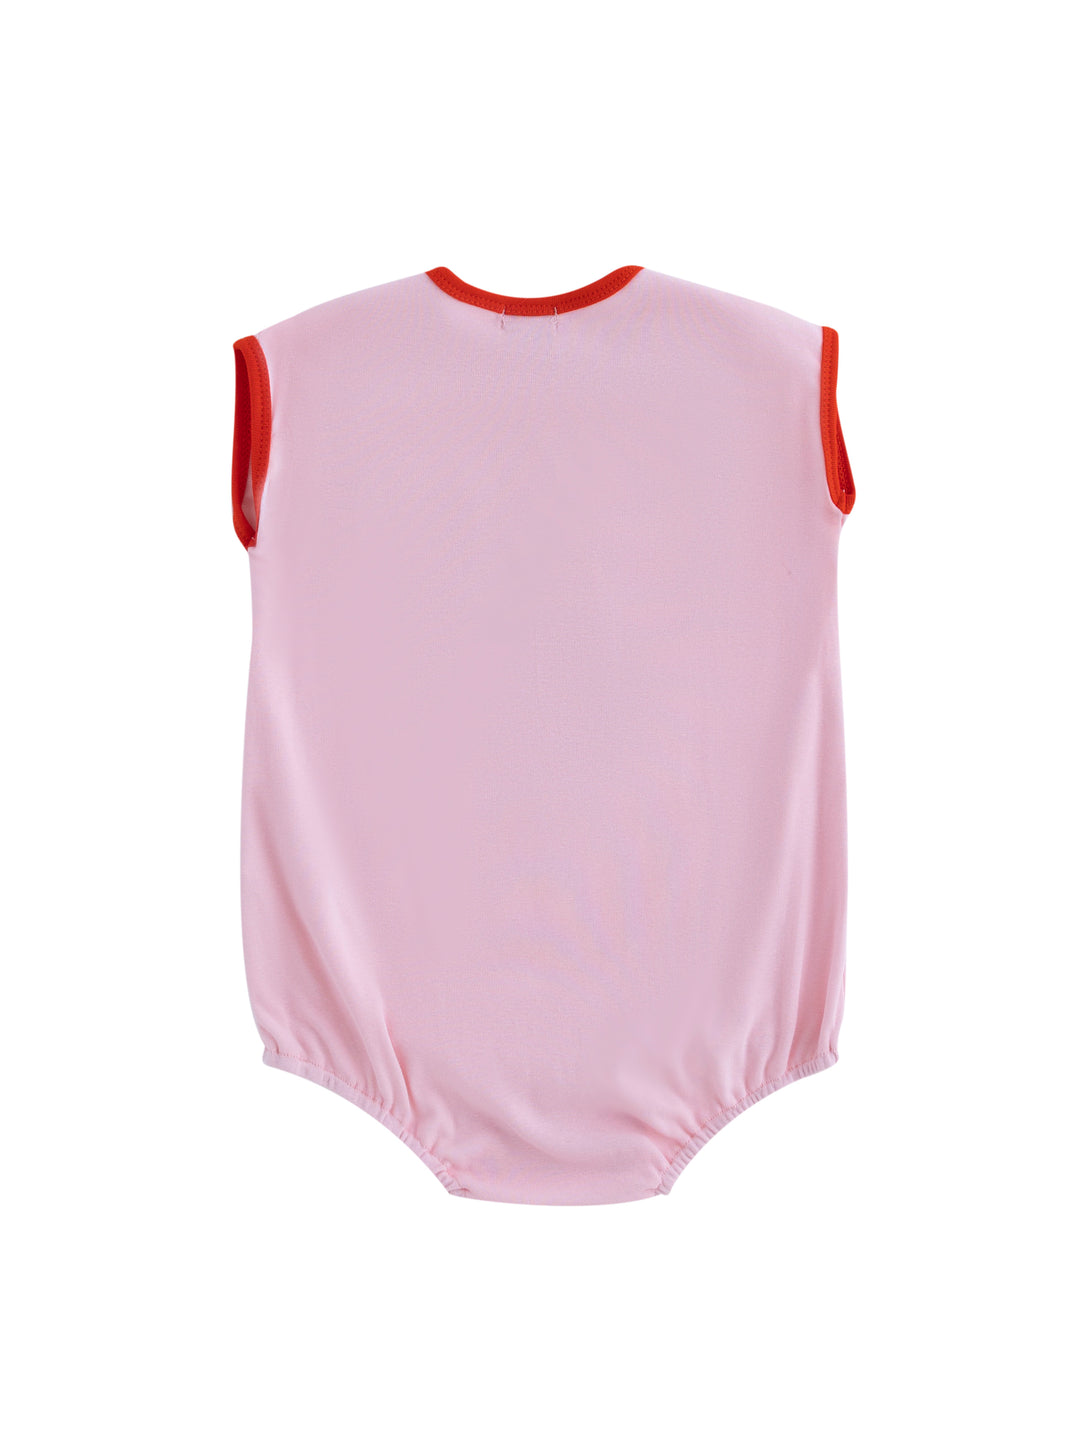 Baby Drop Piping Romper - Lt. Pink